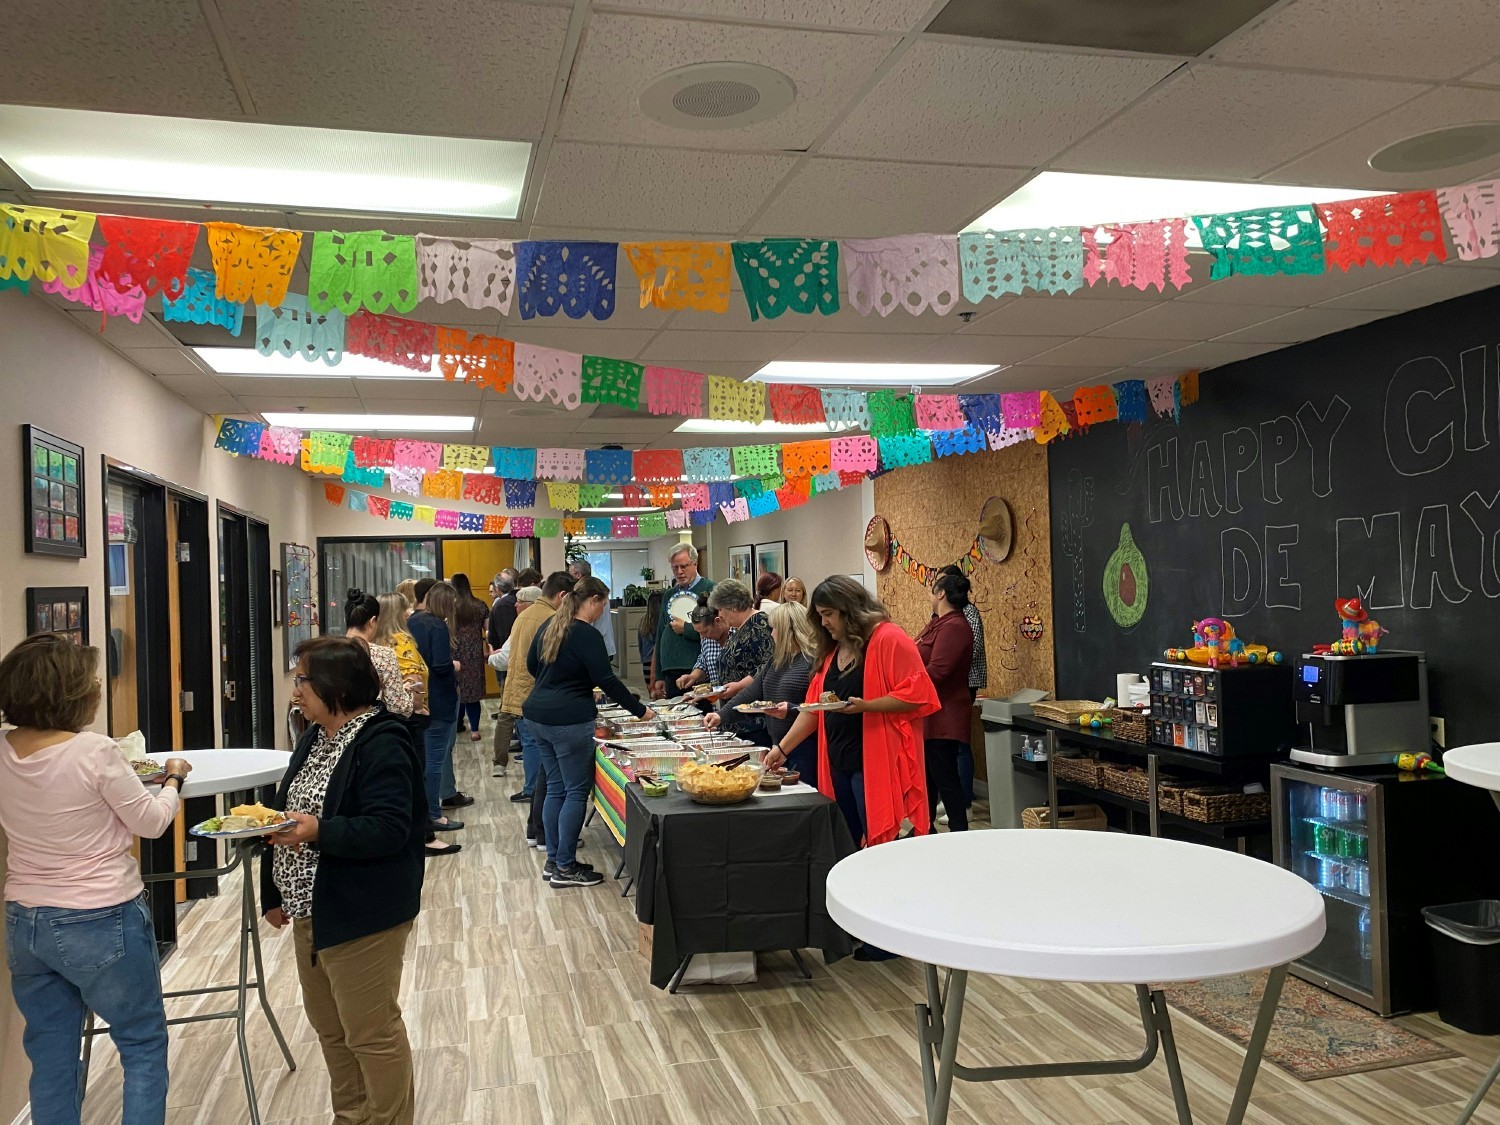 Our annual Wholly Guacamole & Salsa Competition and celebration!